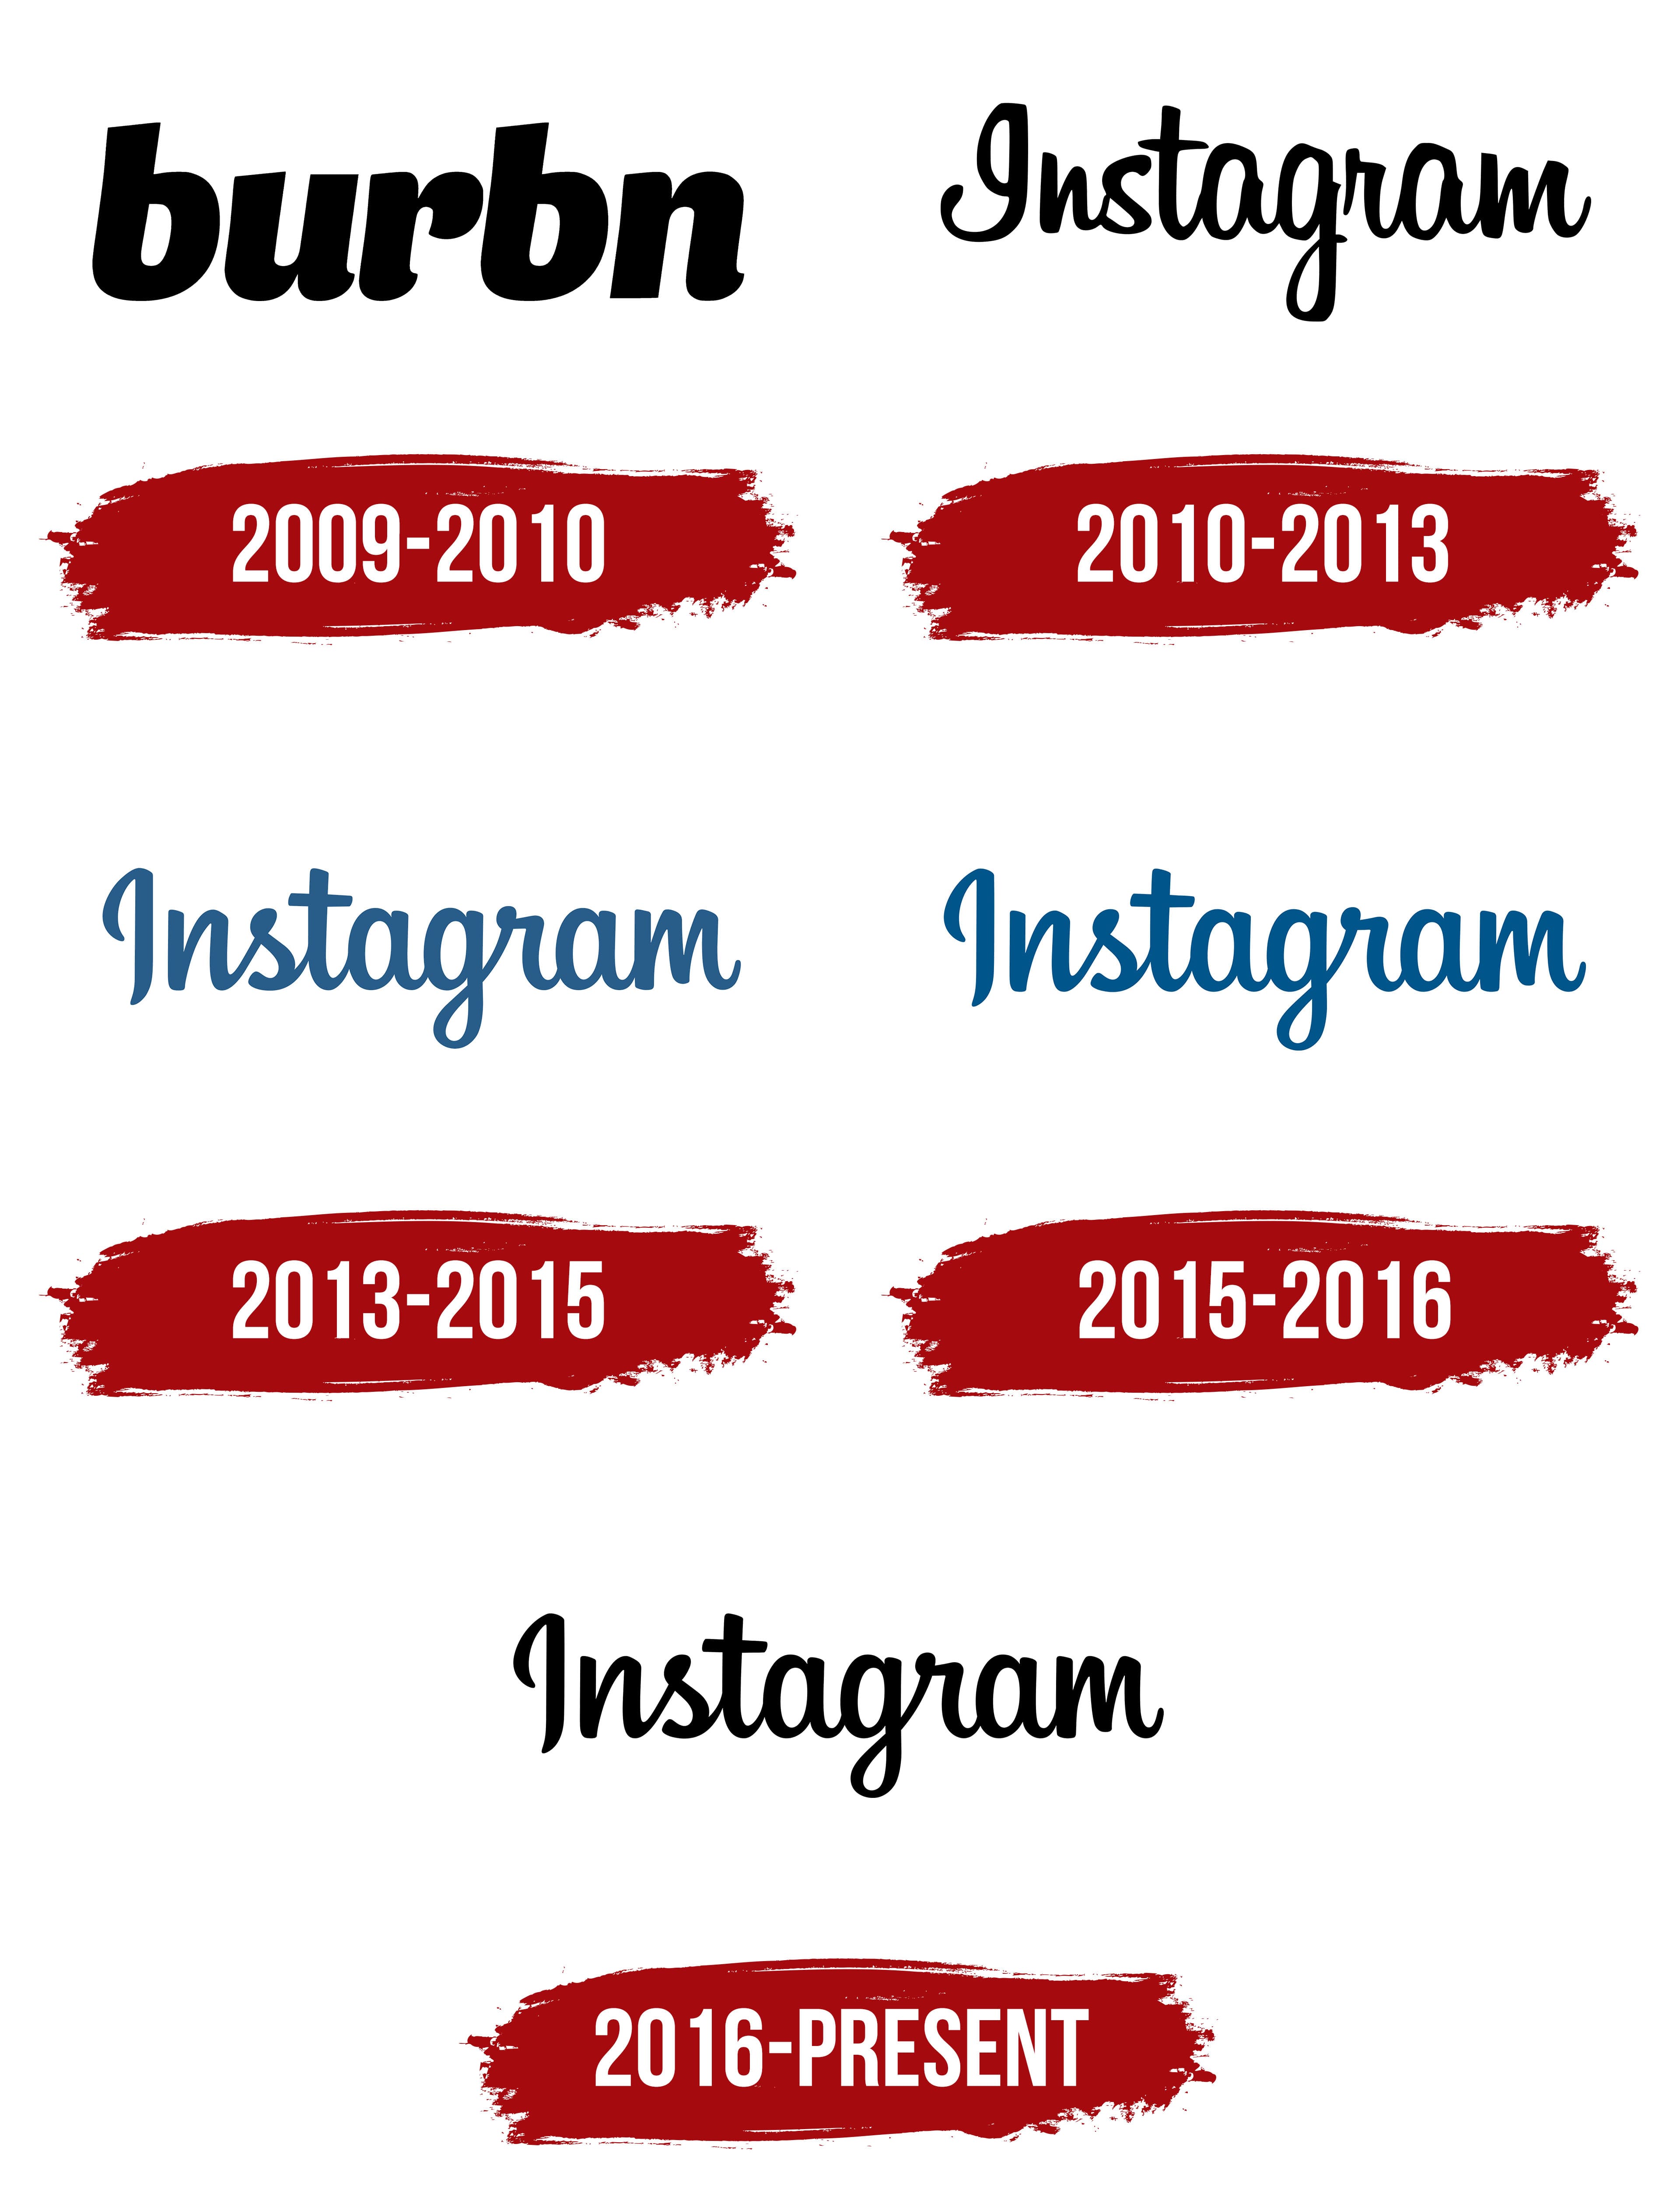 Top 99 logo instagram history most viewed and downloaded - Wikipedia